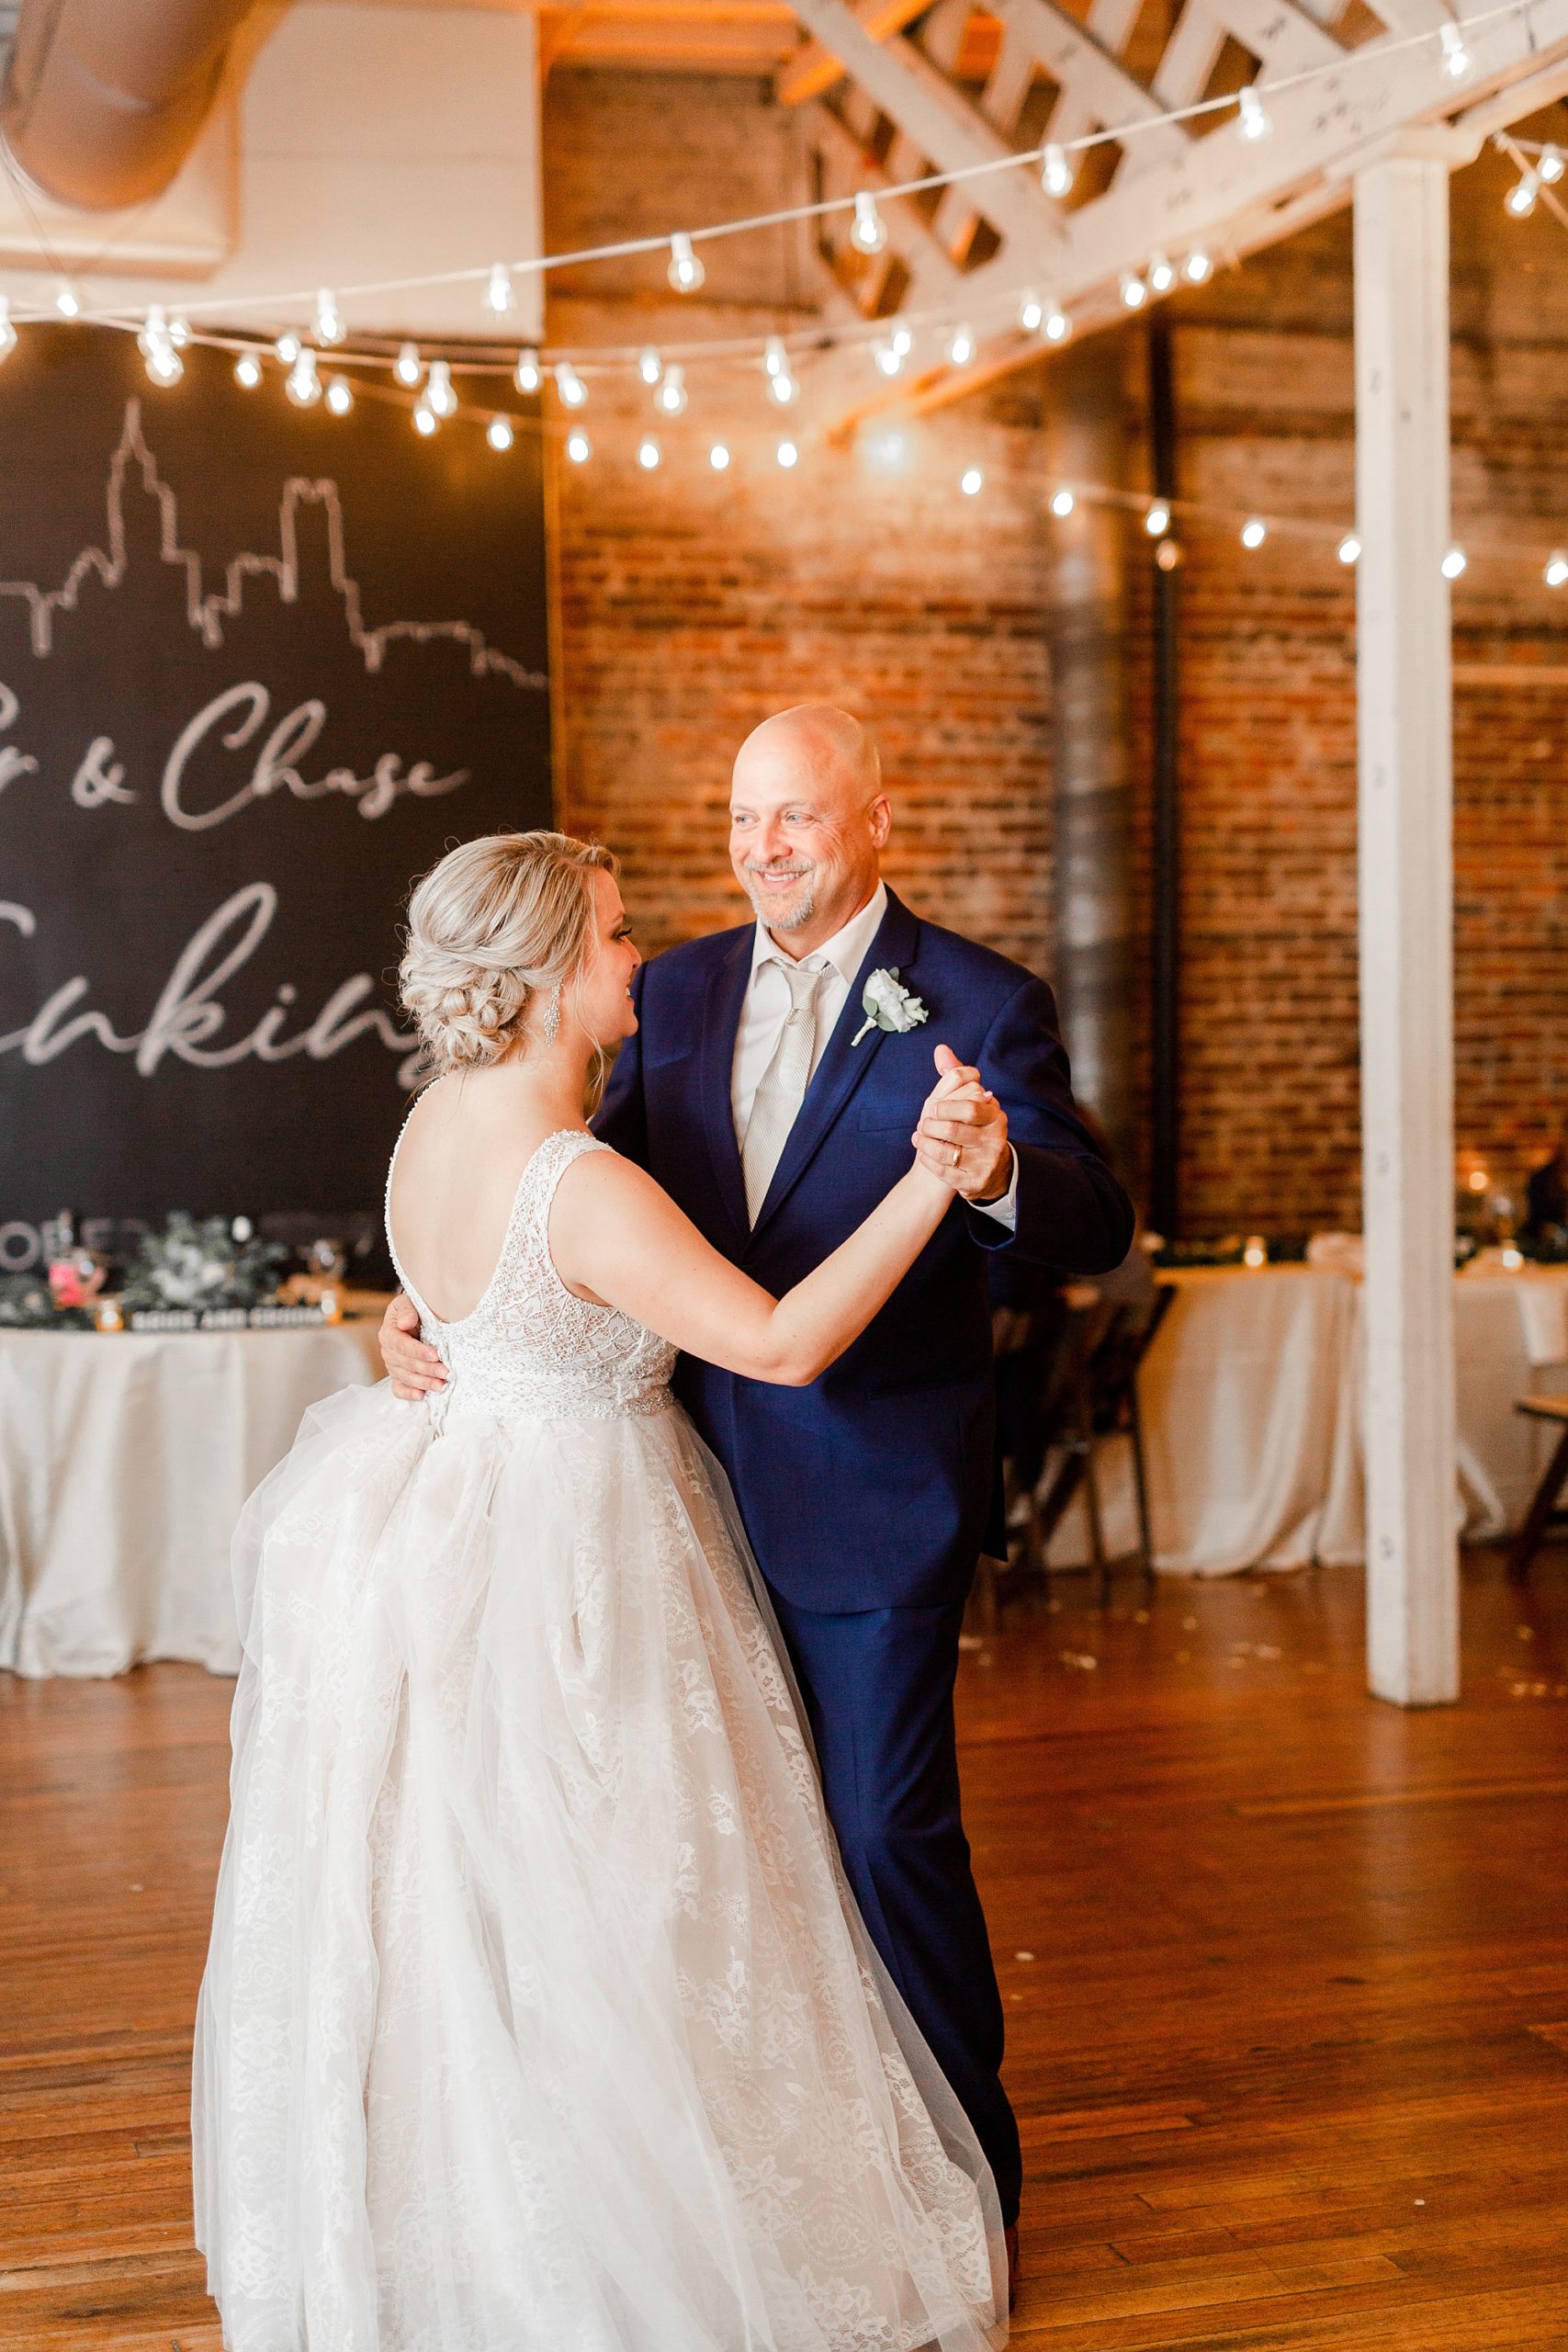 father-daughter dance at Raleigh NC wedding reception